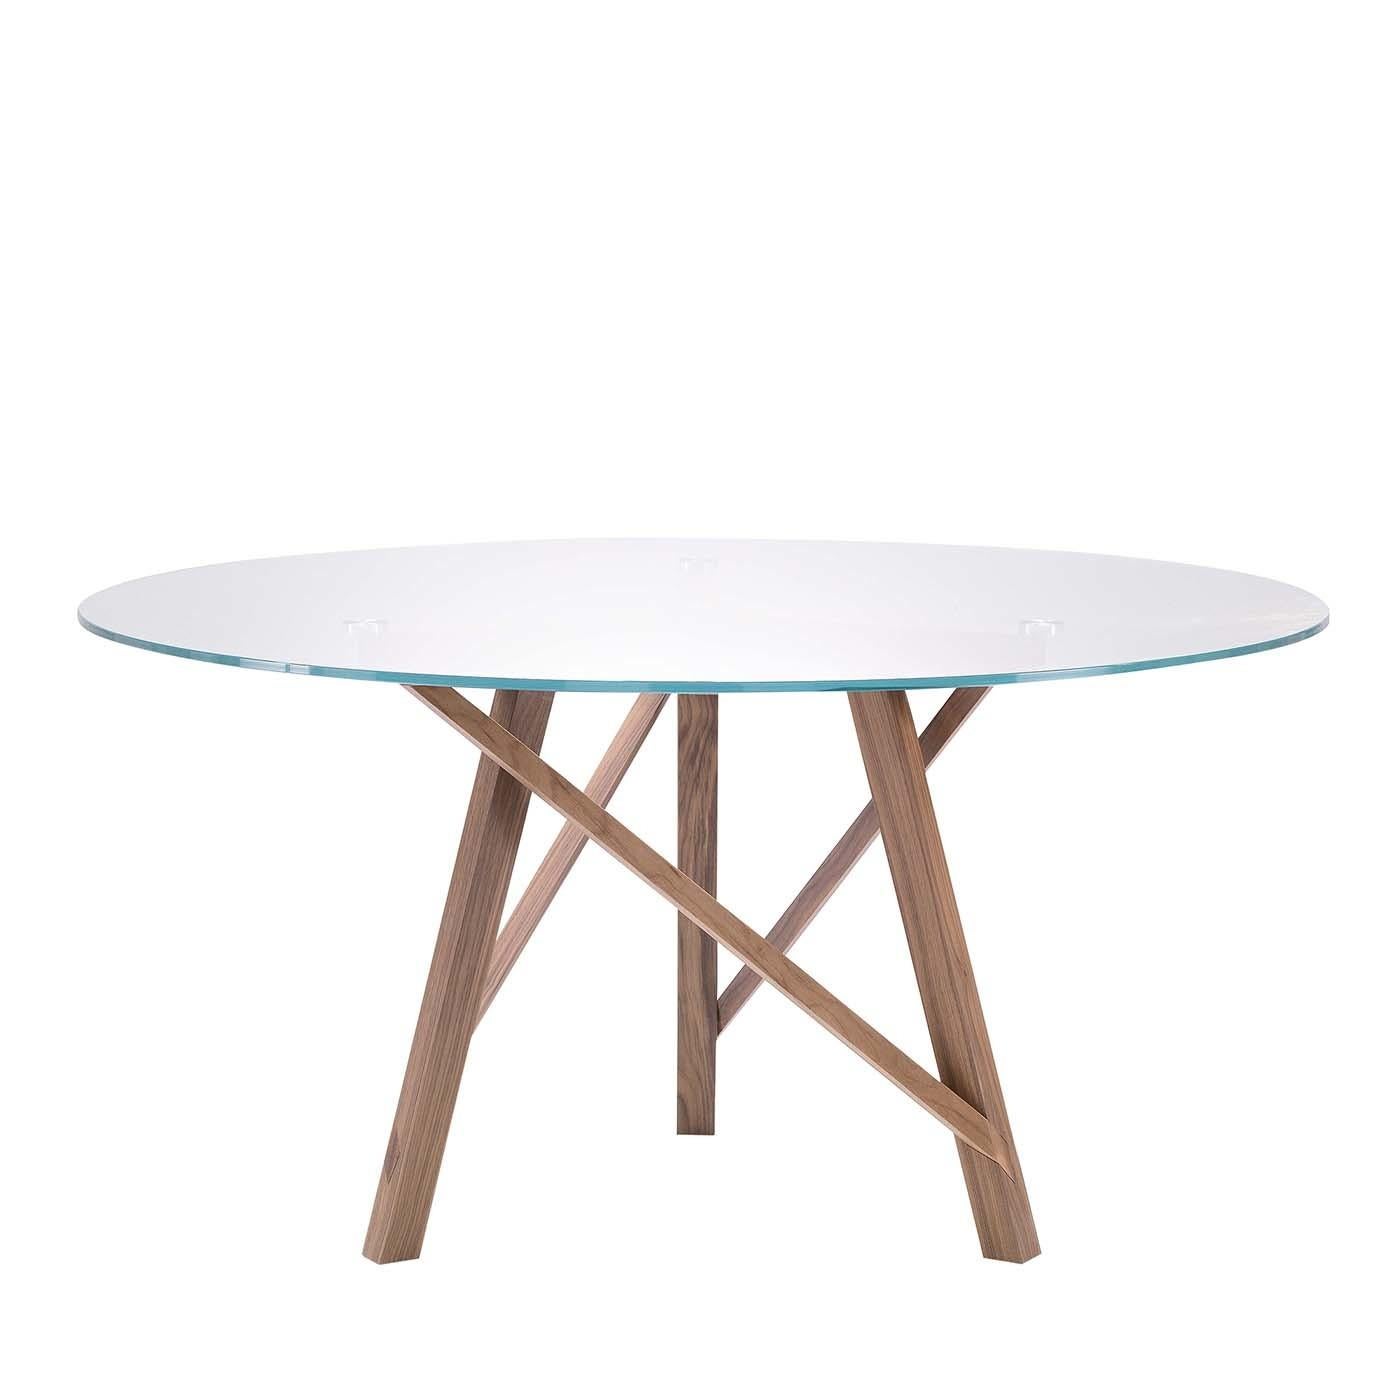 Italian Zeus Round Table by Giuliano and Gabriele Cappelletti by Pacini & Cappellini For Sale